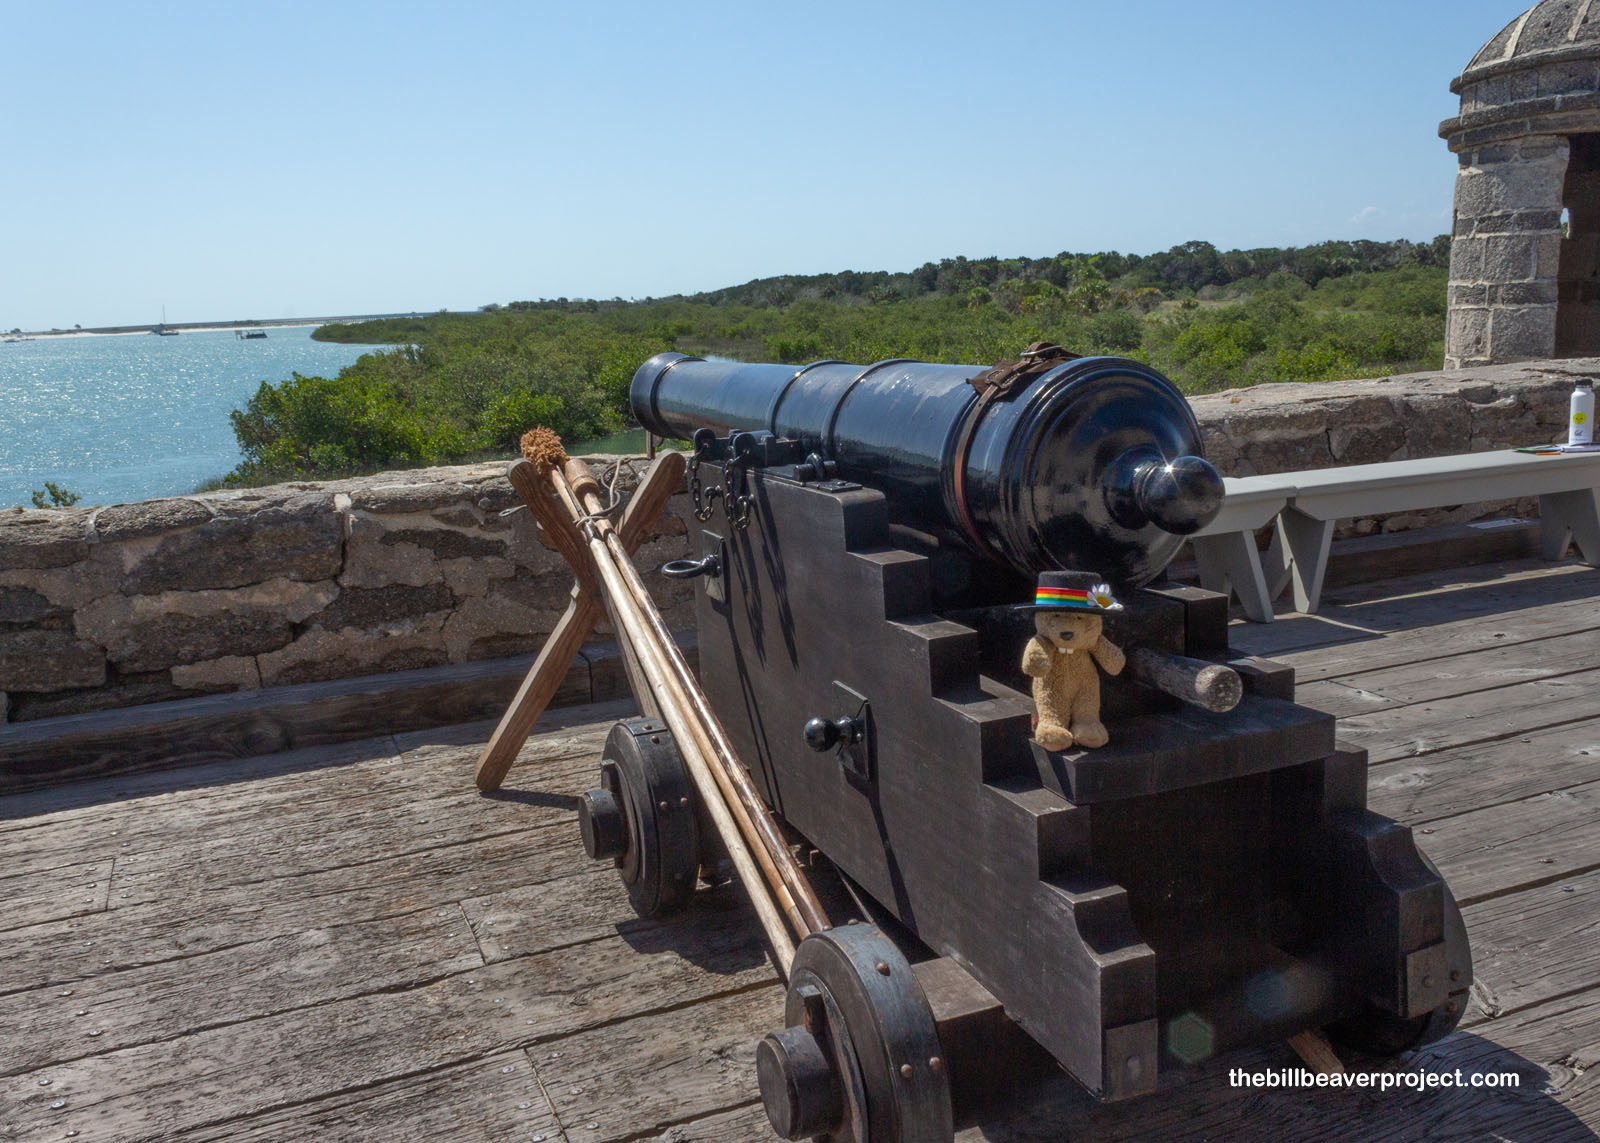 That cannon sure was formidable!